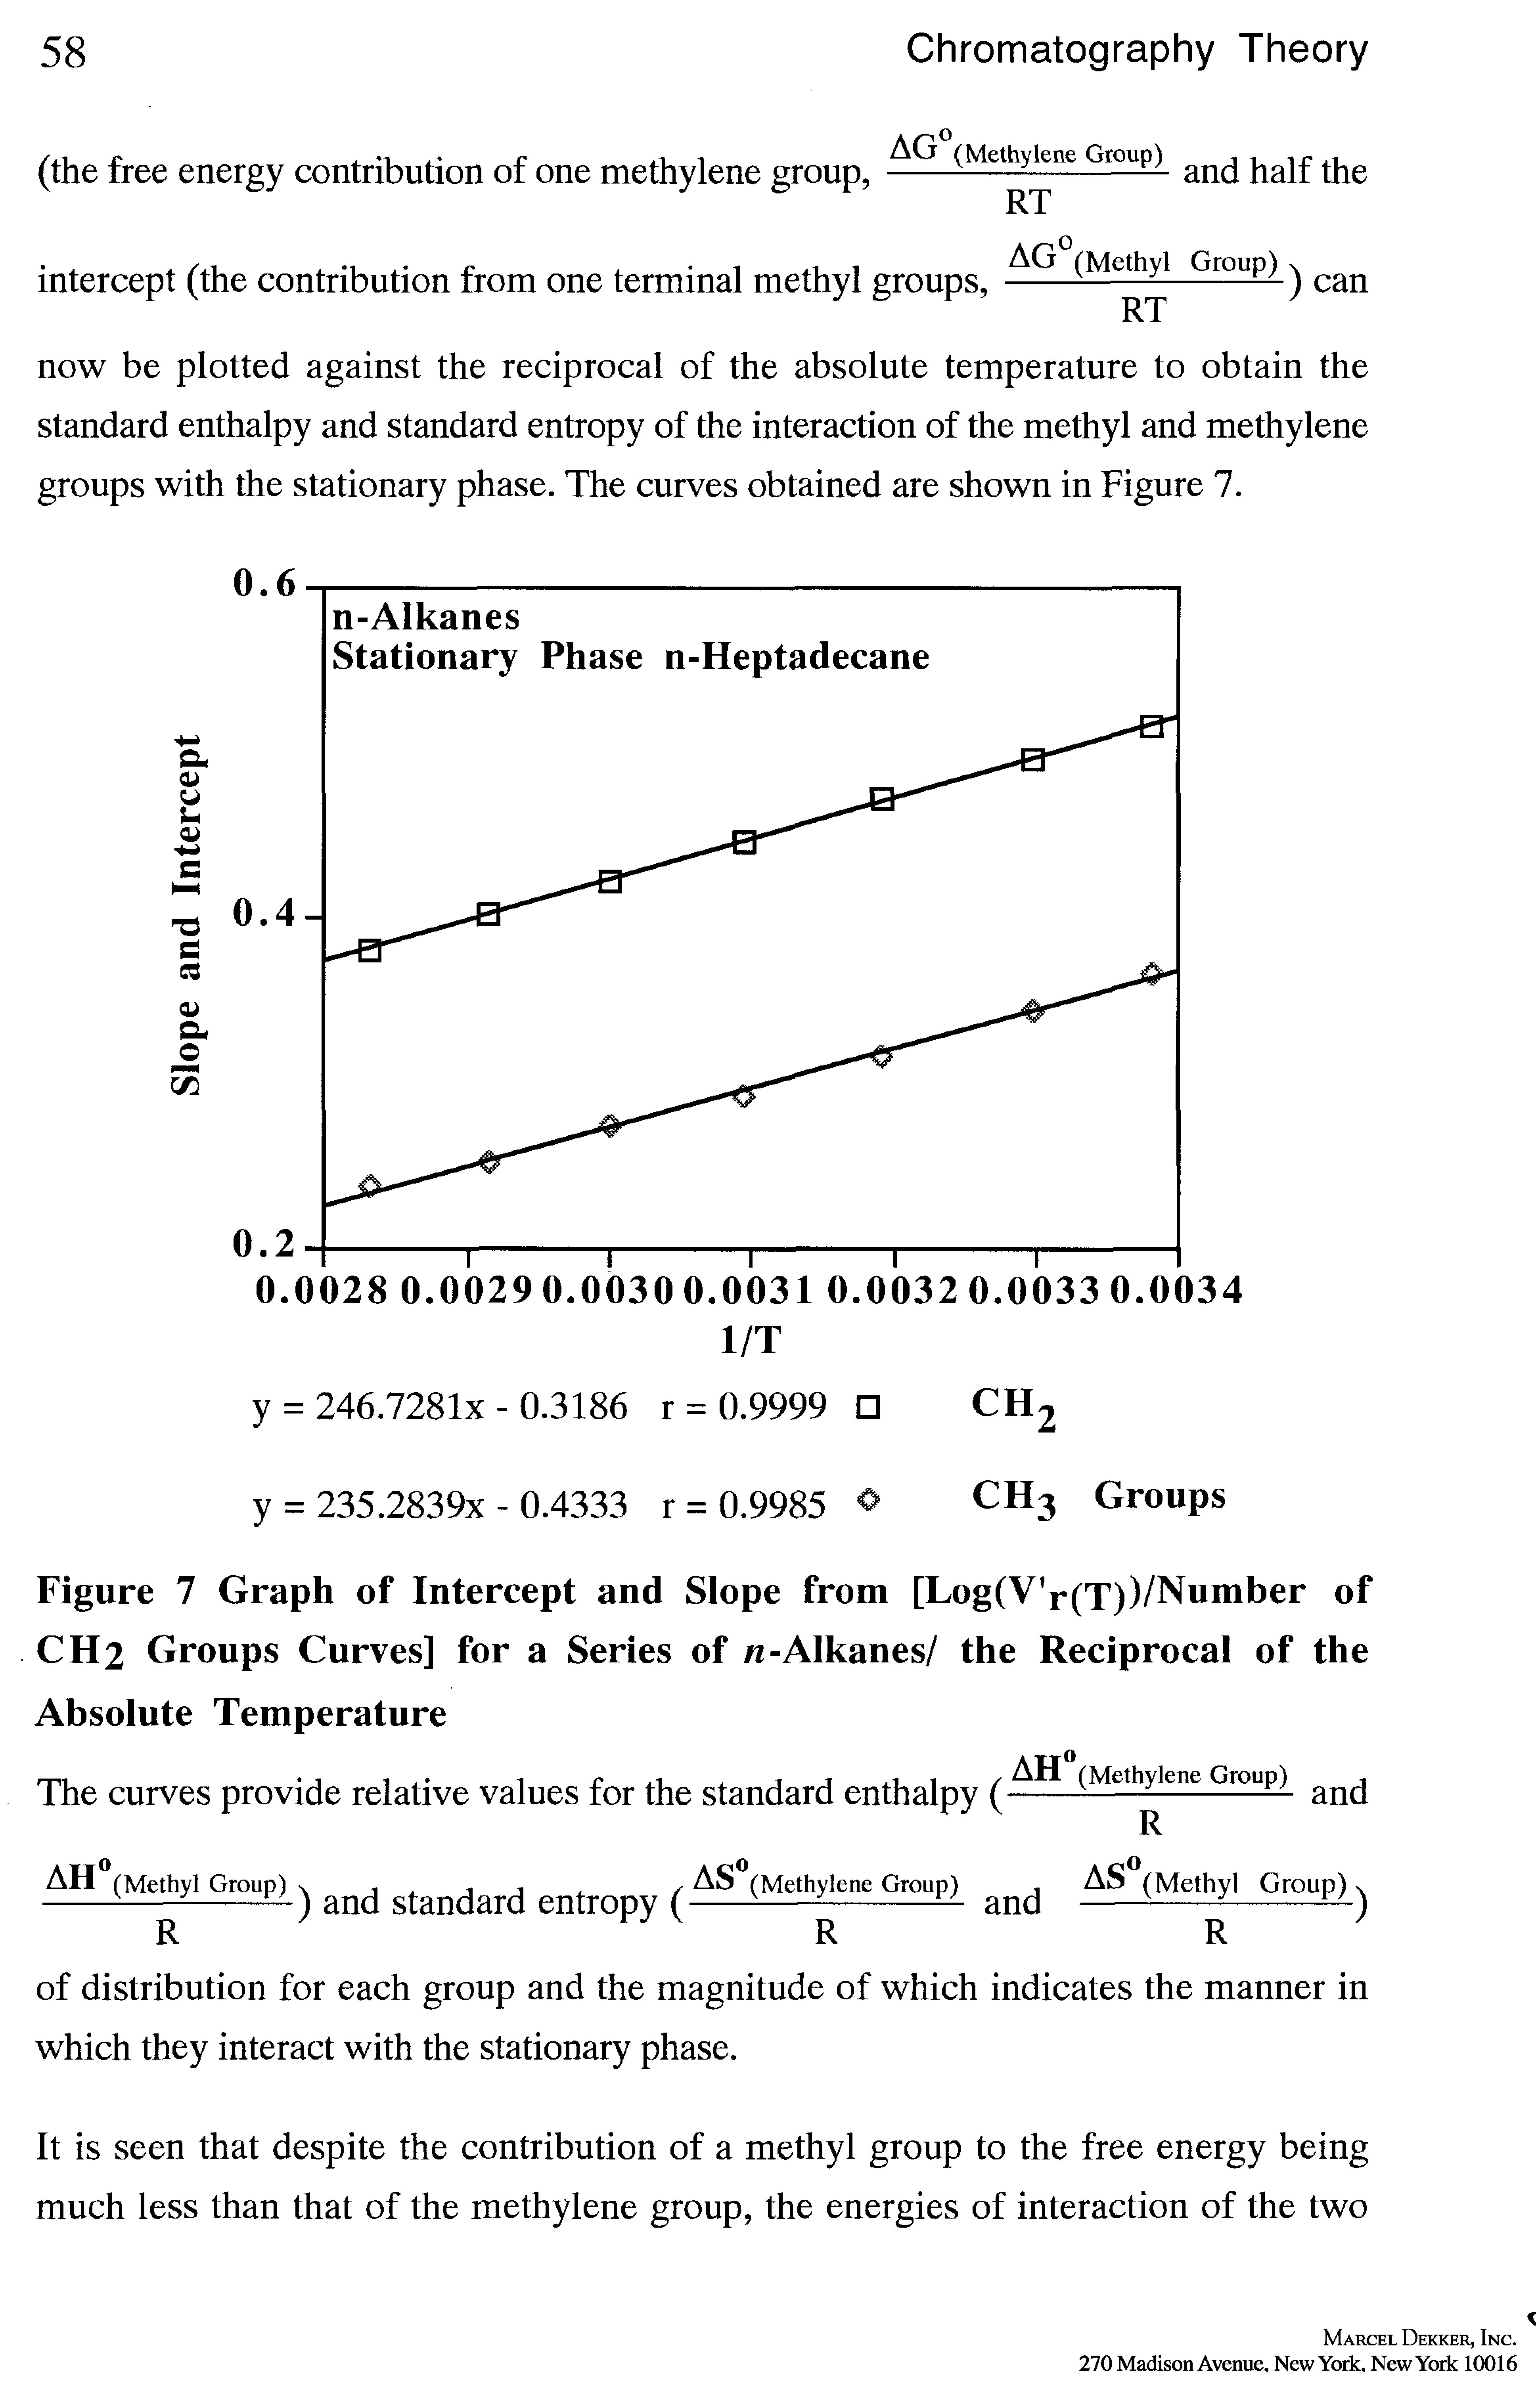 Figure 7 Graph of Intercept and Slope from [Log(V r(T))/Number of CH2 Groups Curves] for a Series of -Alkanes/ the Reciprocal of the Absolute Temperature...